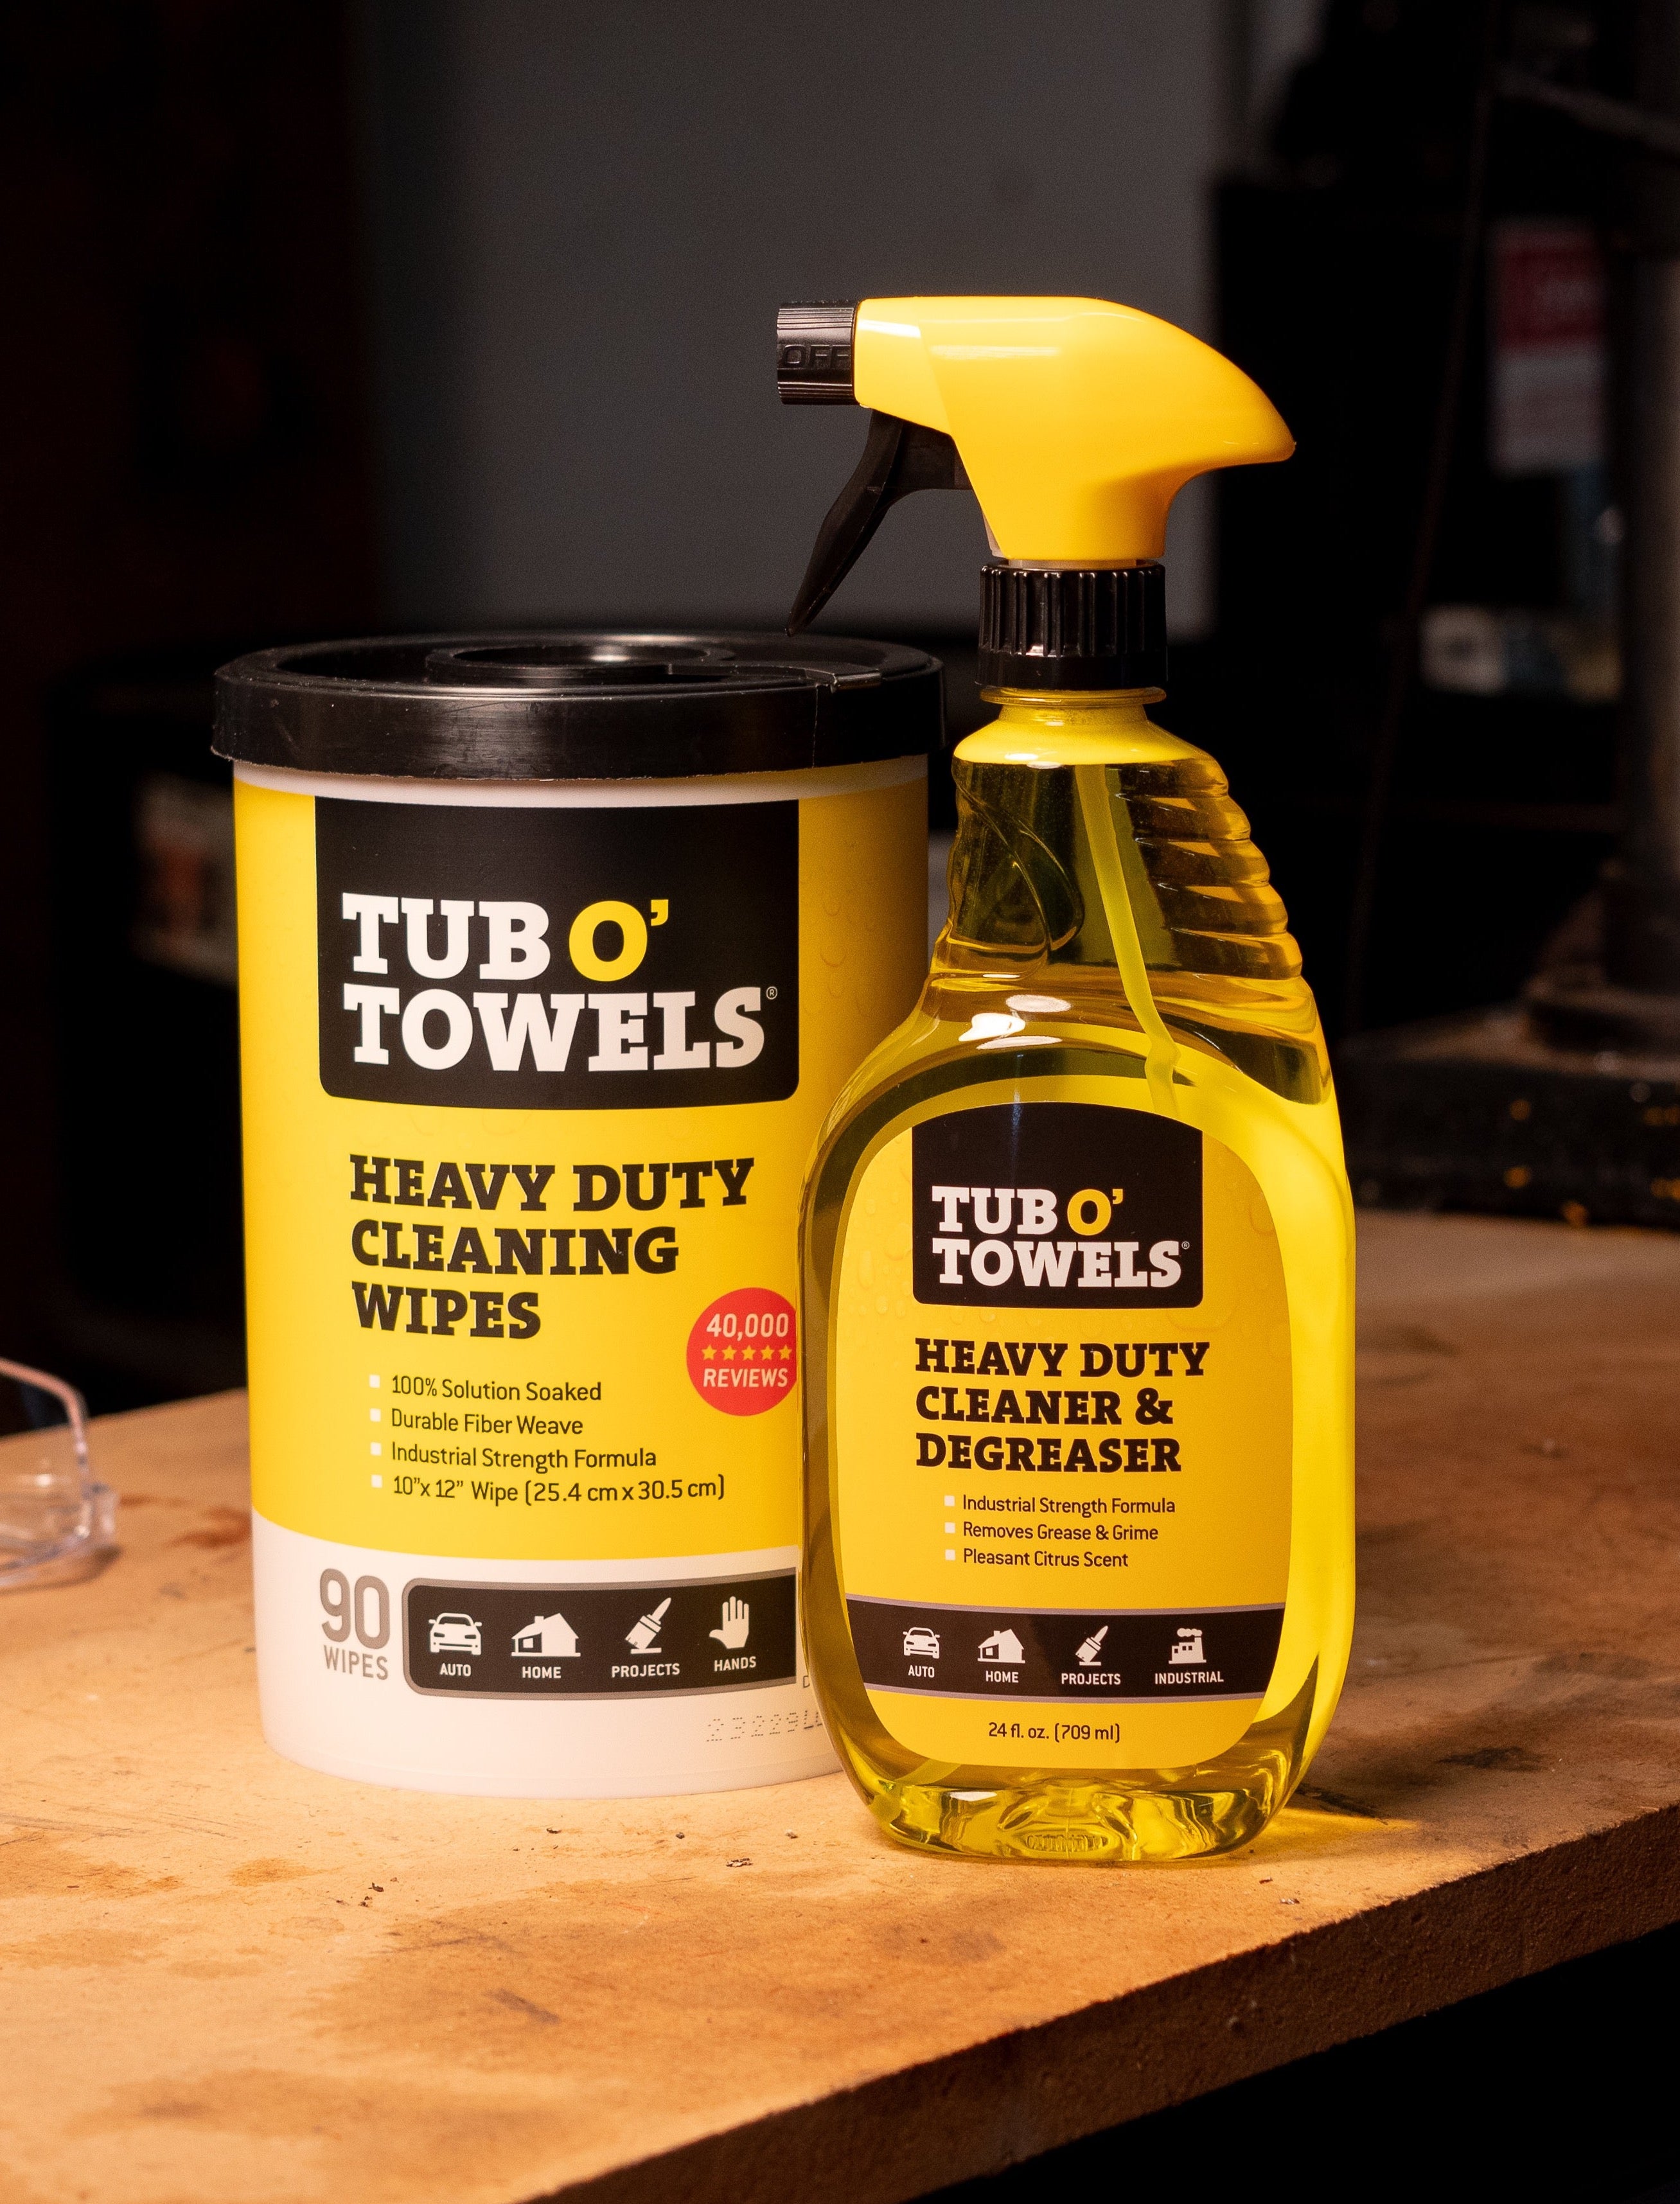 Federal Process Introduces Industrial-Strength Tub O'Towels Scrubbing Wipes